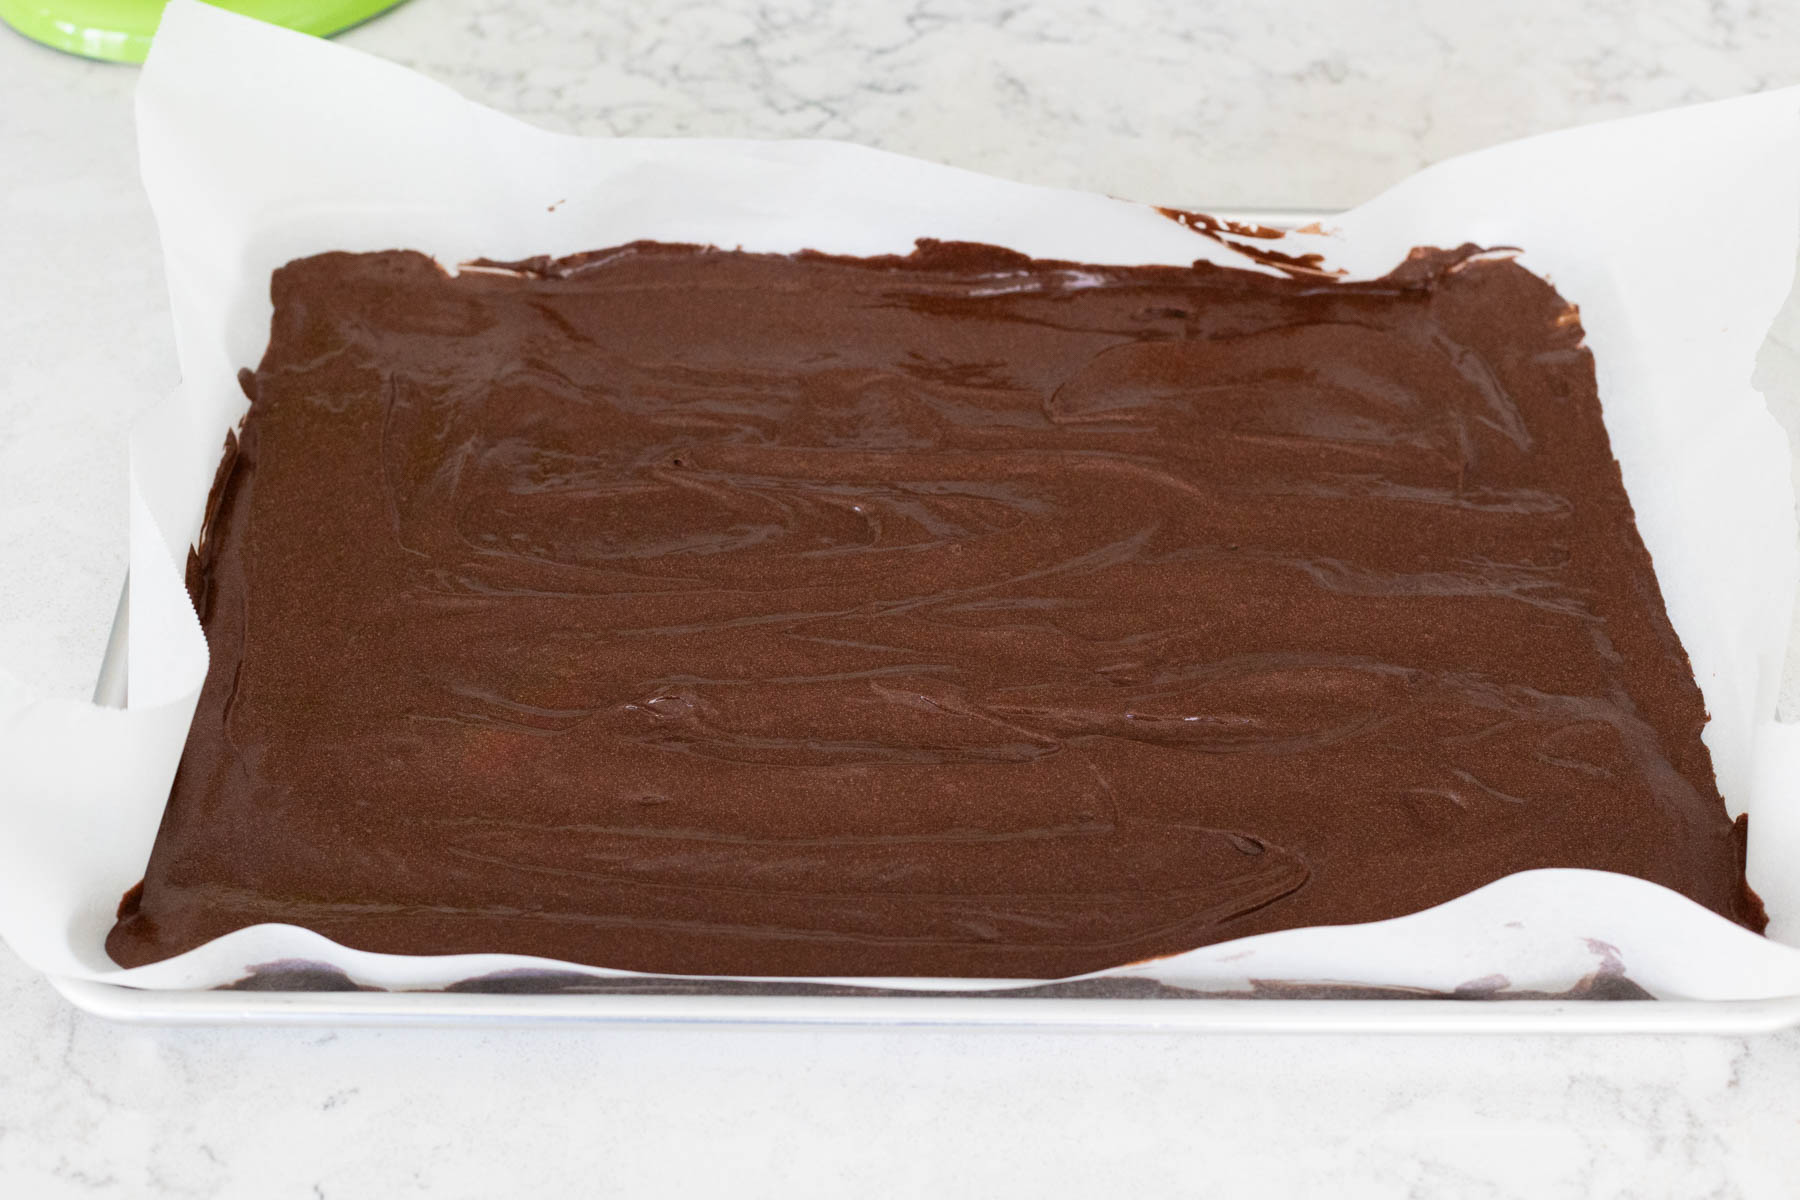 The chocolate cake batter has been spread into a large baking sheet lined with parchment paper.